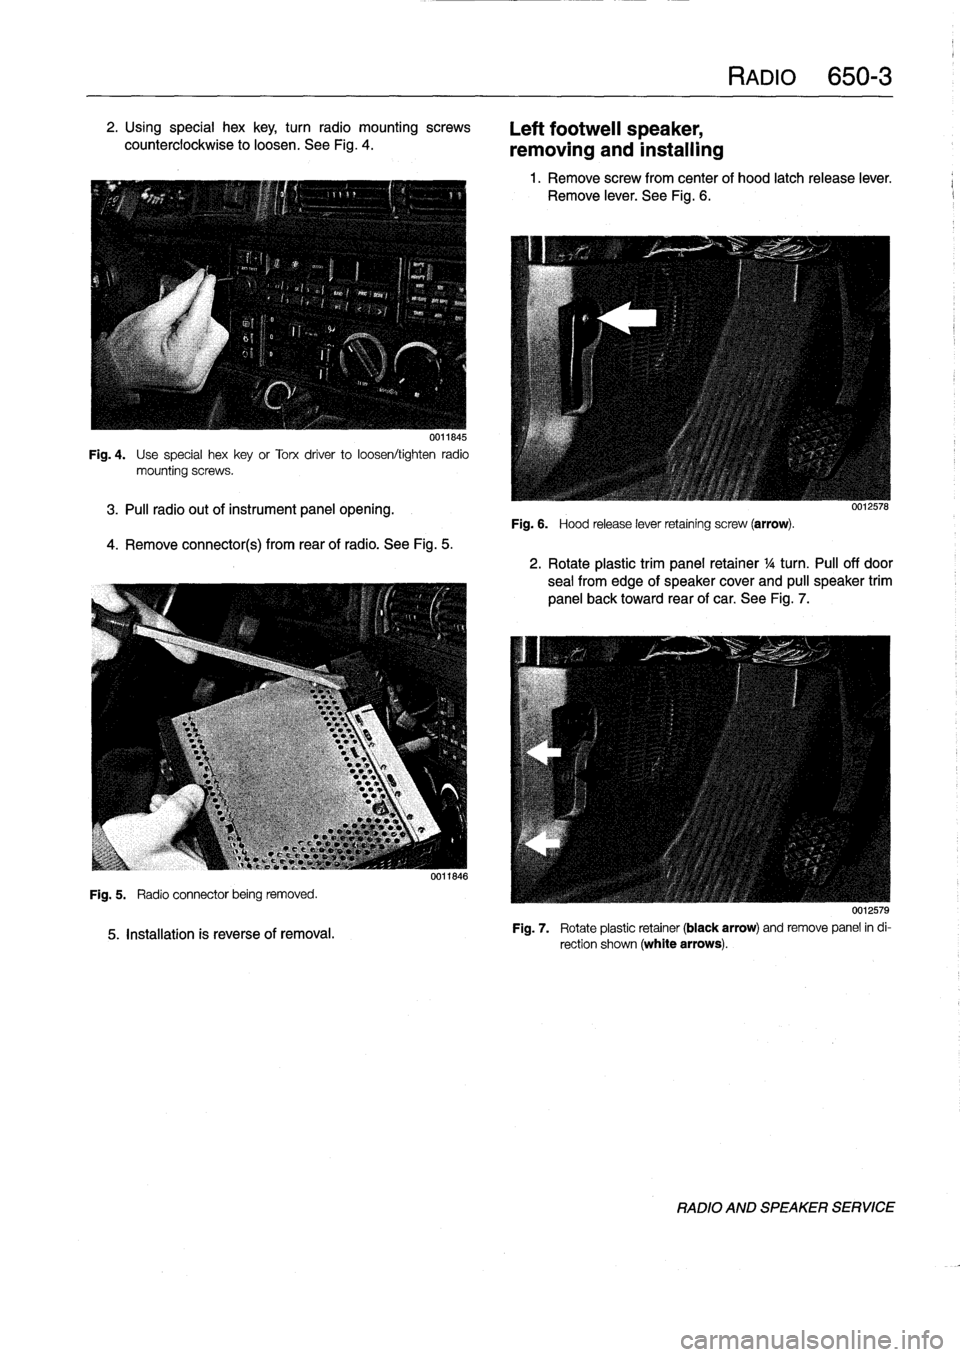 BMW 318i 1997 E36 Workshop Manual 2
.
Using
special
hex
key,
turn
radio
mountingscrews

counterclockwise
to
loosen
.
See
Fig
.
4
.

0011845

Fig
.
4
.

	

Use
special
hexkey
or
Torx
driver
to
loosen/tighten
radio
mountingscrews
.

3
.